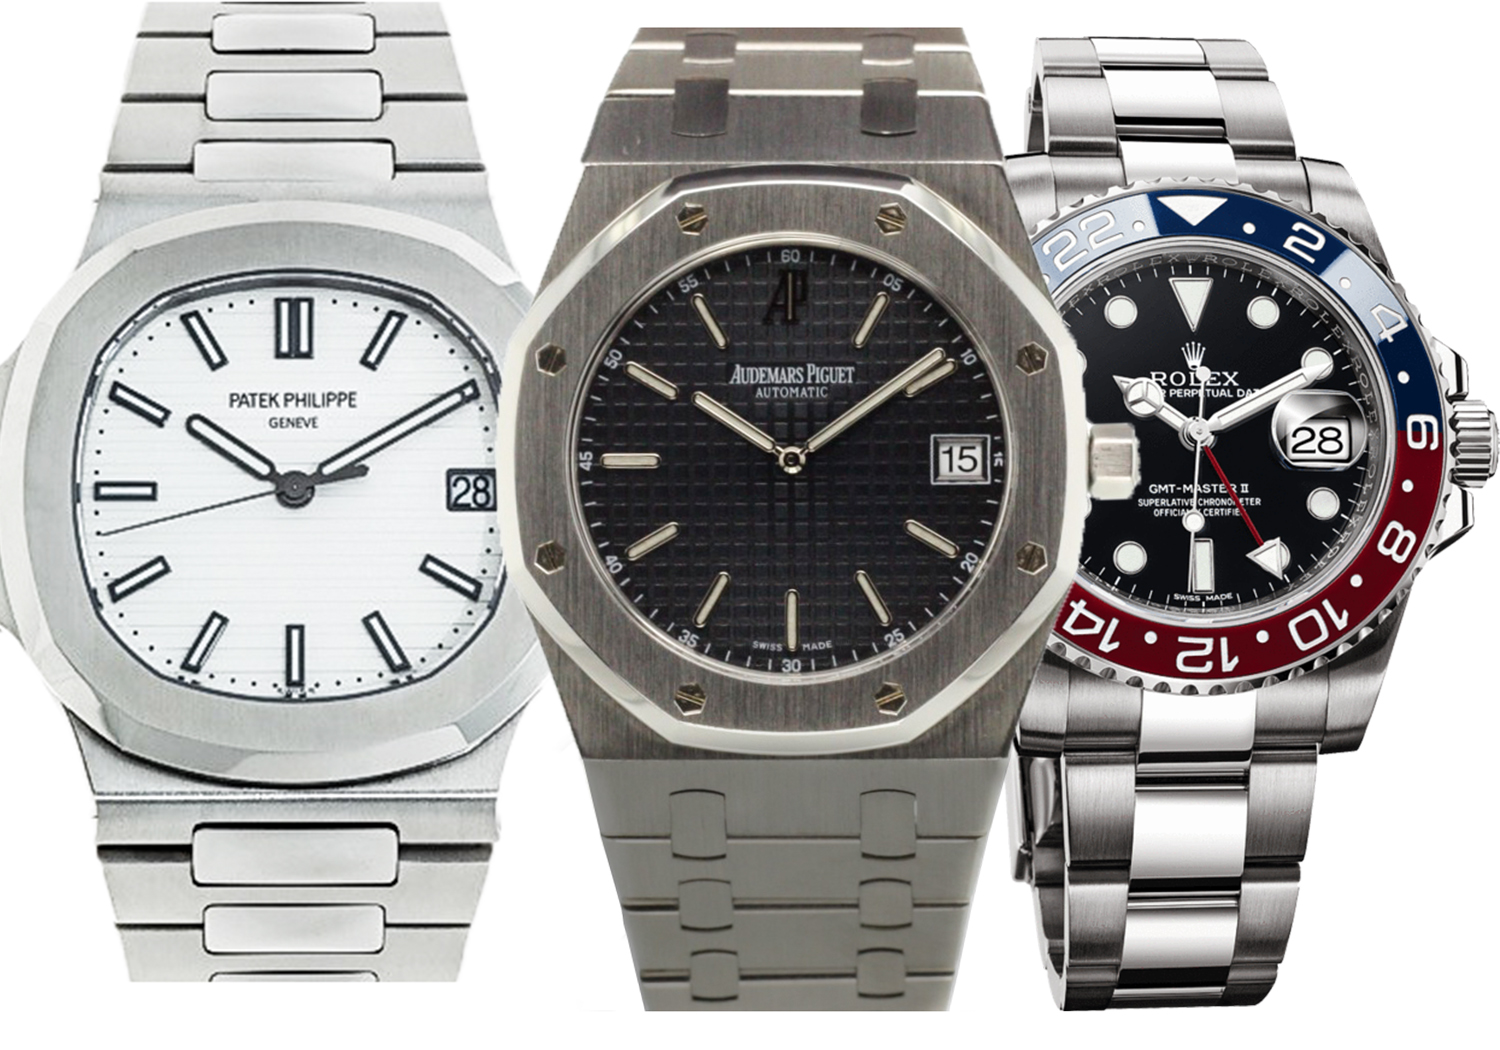 rolex-watches-are-a-poor-investment-today-warns-morgan-stanley-as-supply-still-exceeds-demand-on-the-secondary-market